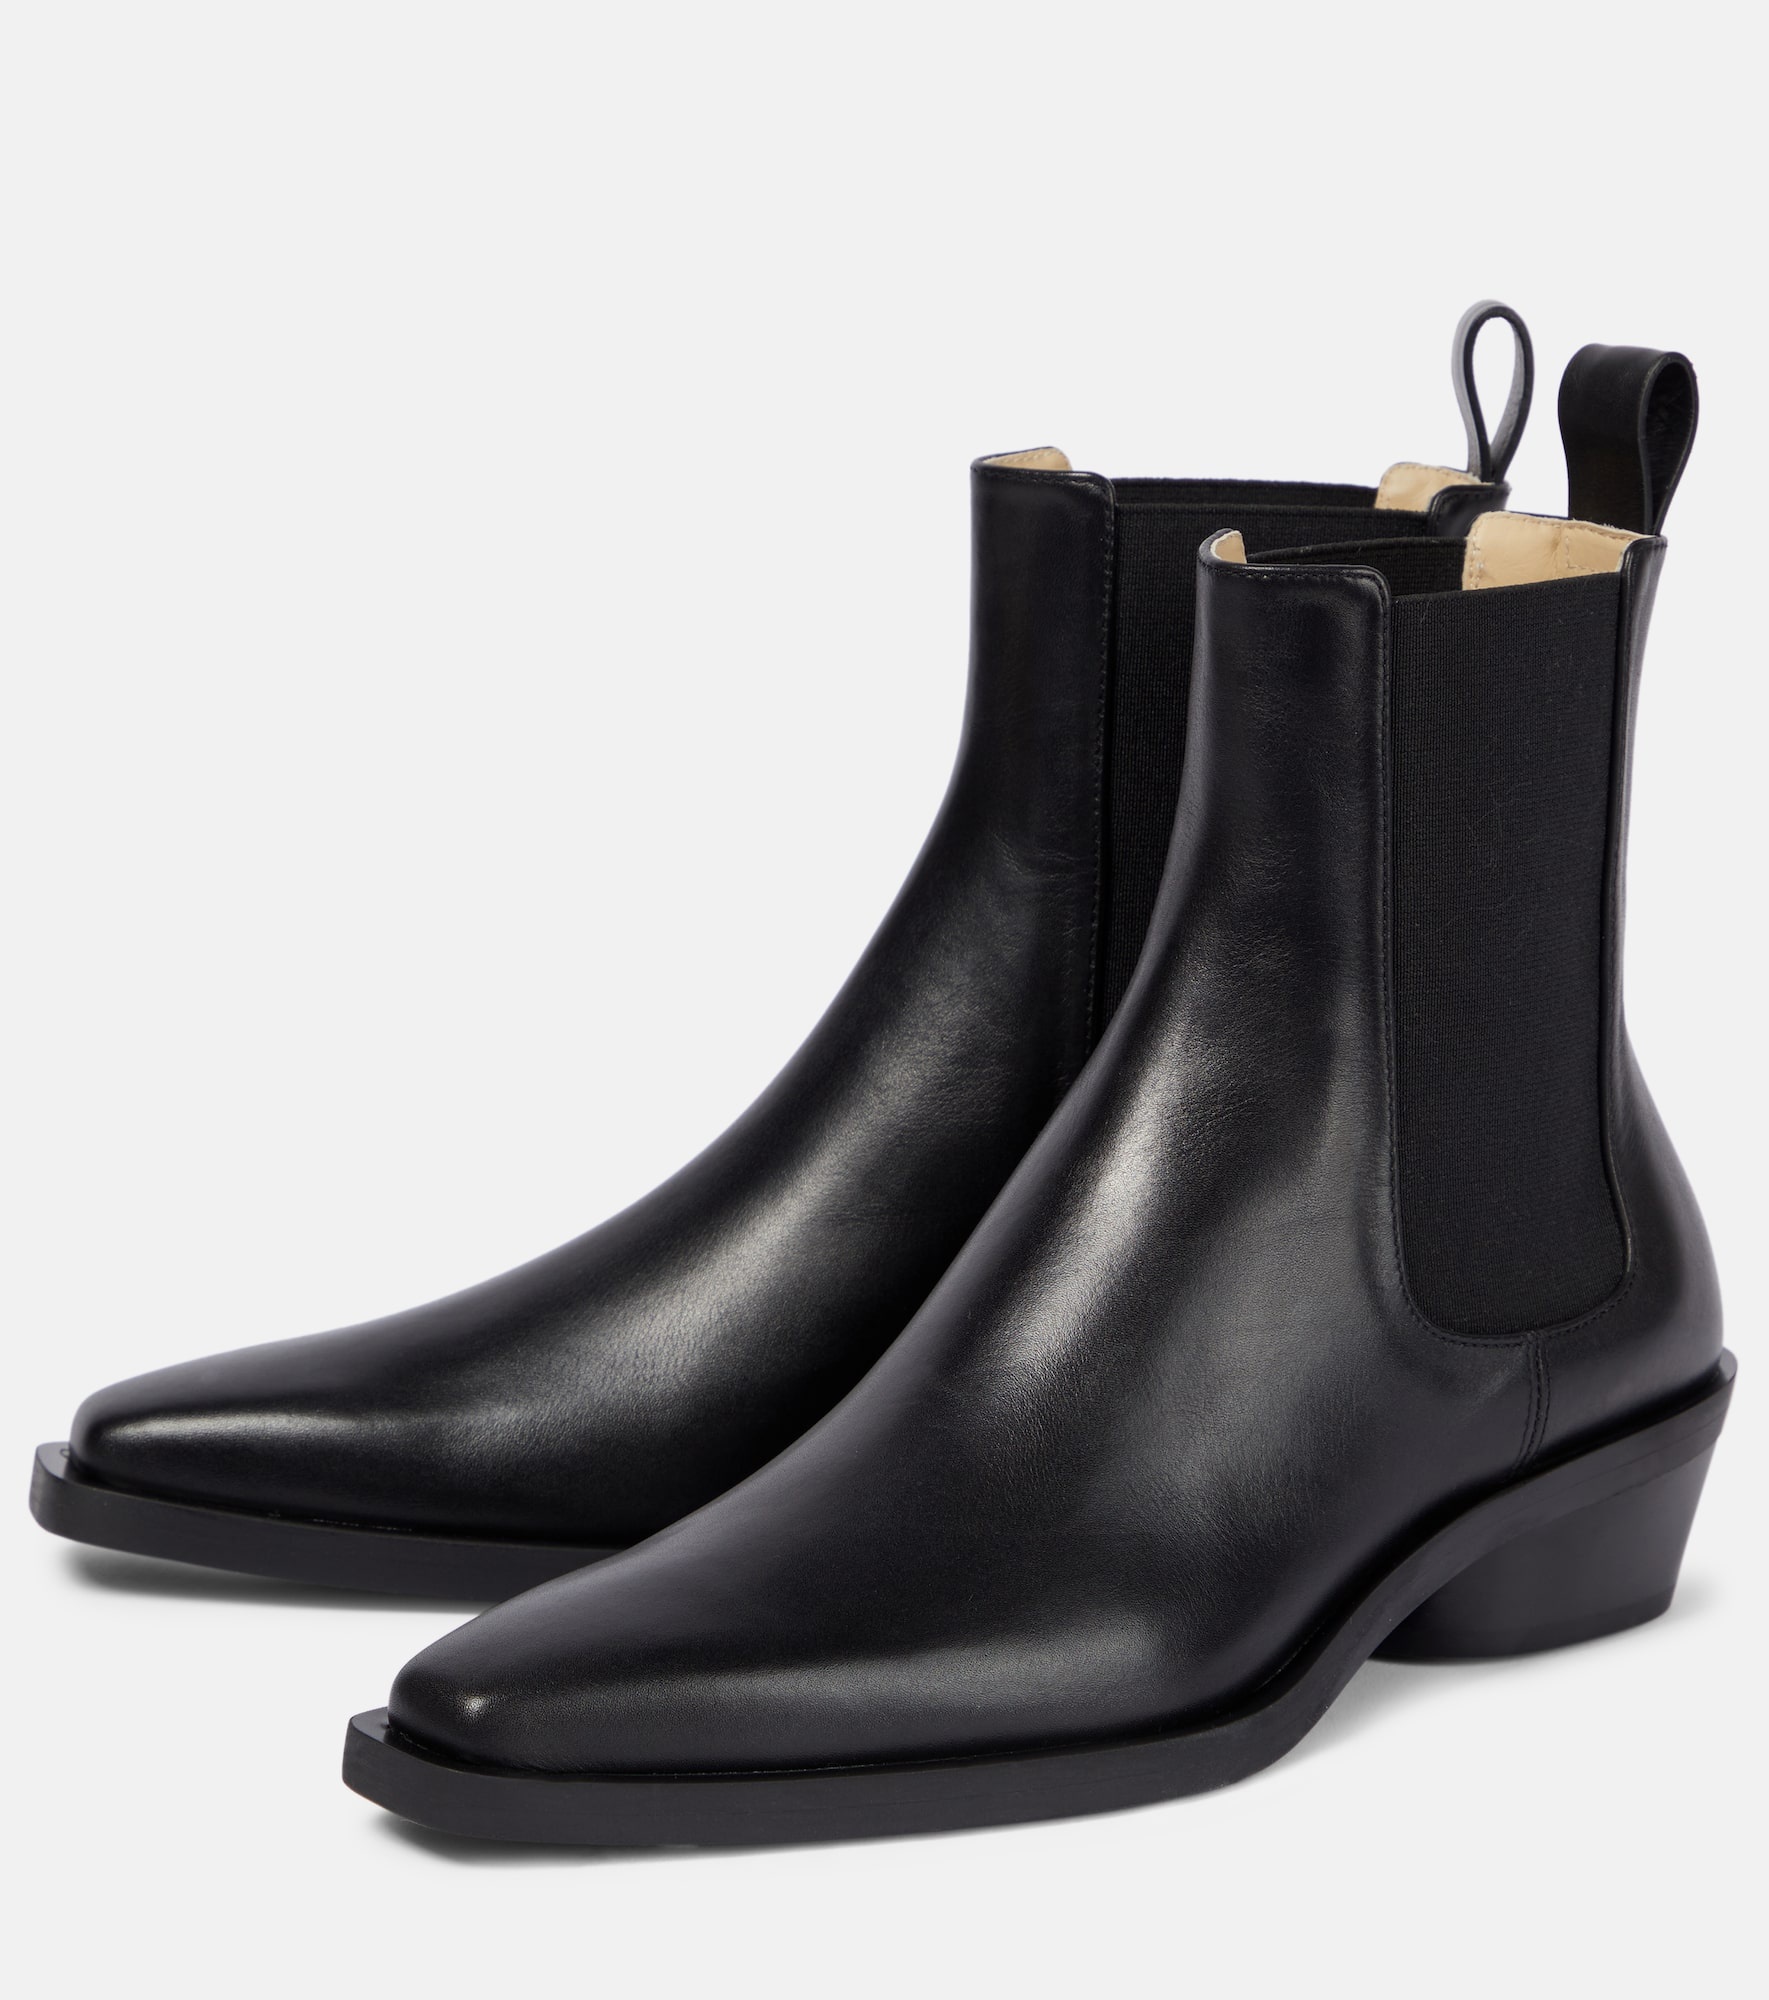 Bronco leather ankle boots - 5